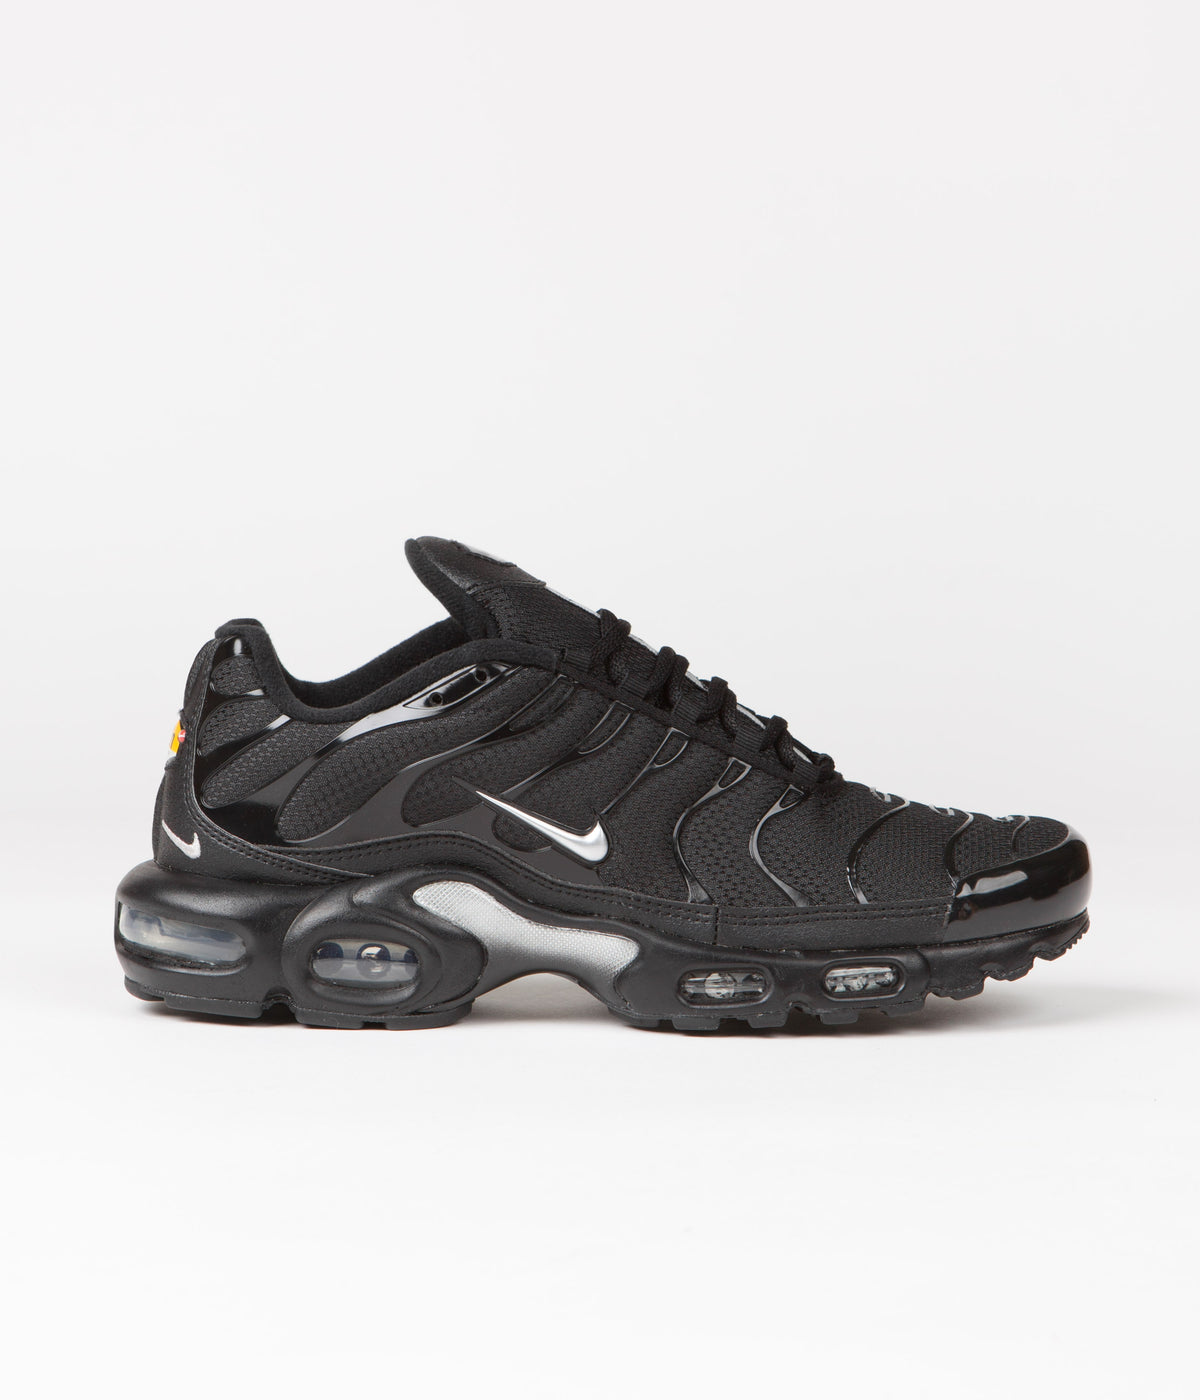 Nike Air Shoes - / Metallic Silver | Always in Colour